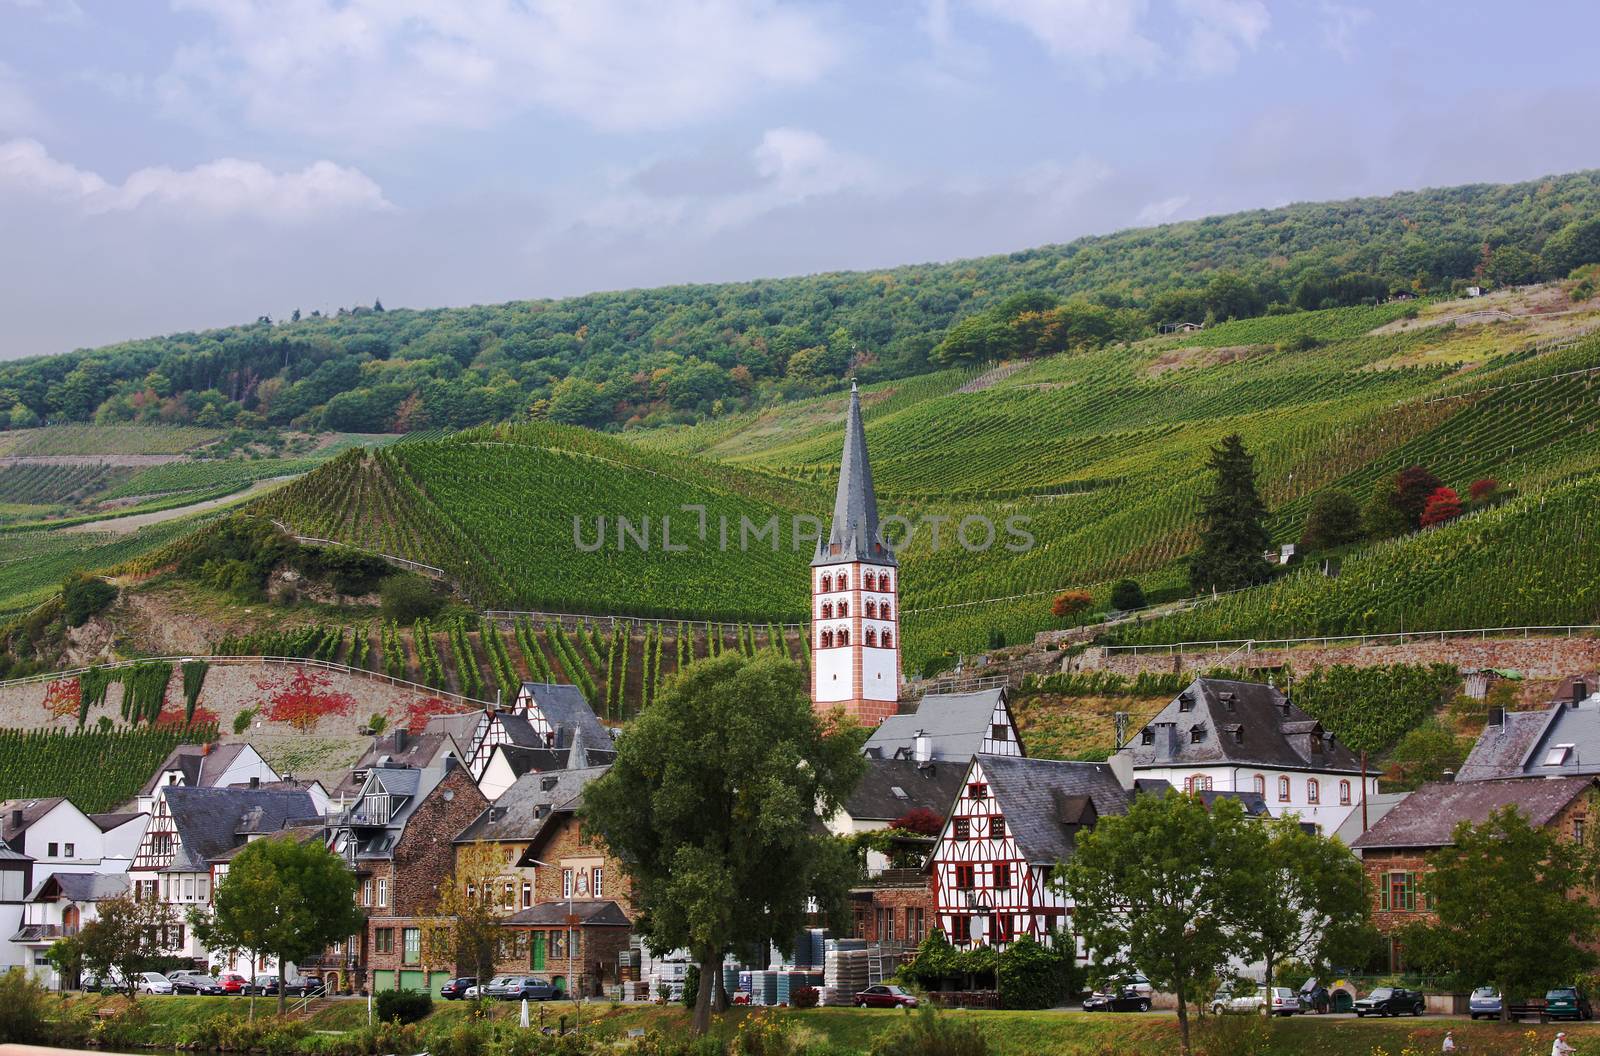 The Mosel valley is one of the most beautiful parts of Germany. On both sides of the river, romantic castles tower over endless vineyards, where excellent white grapes are grown